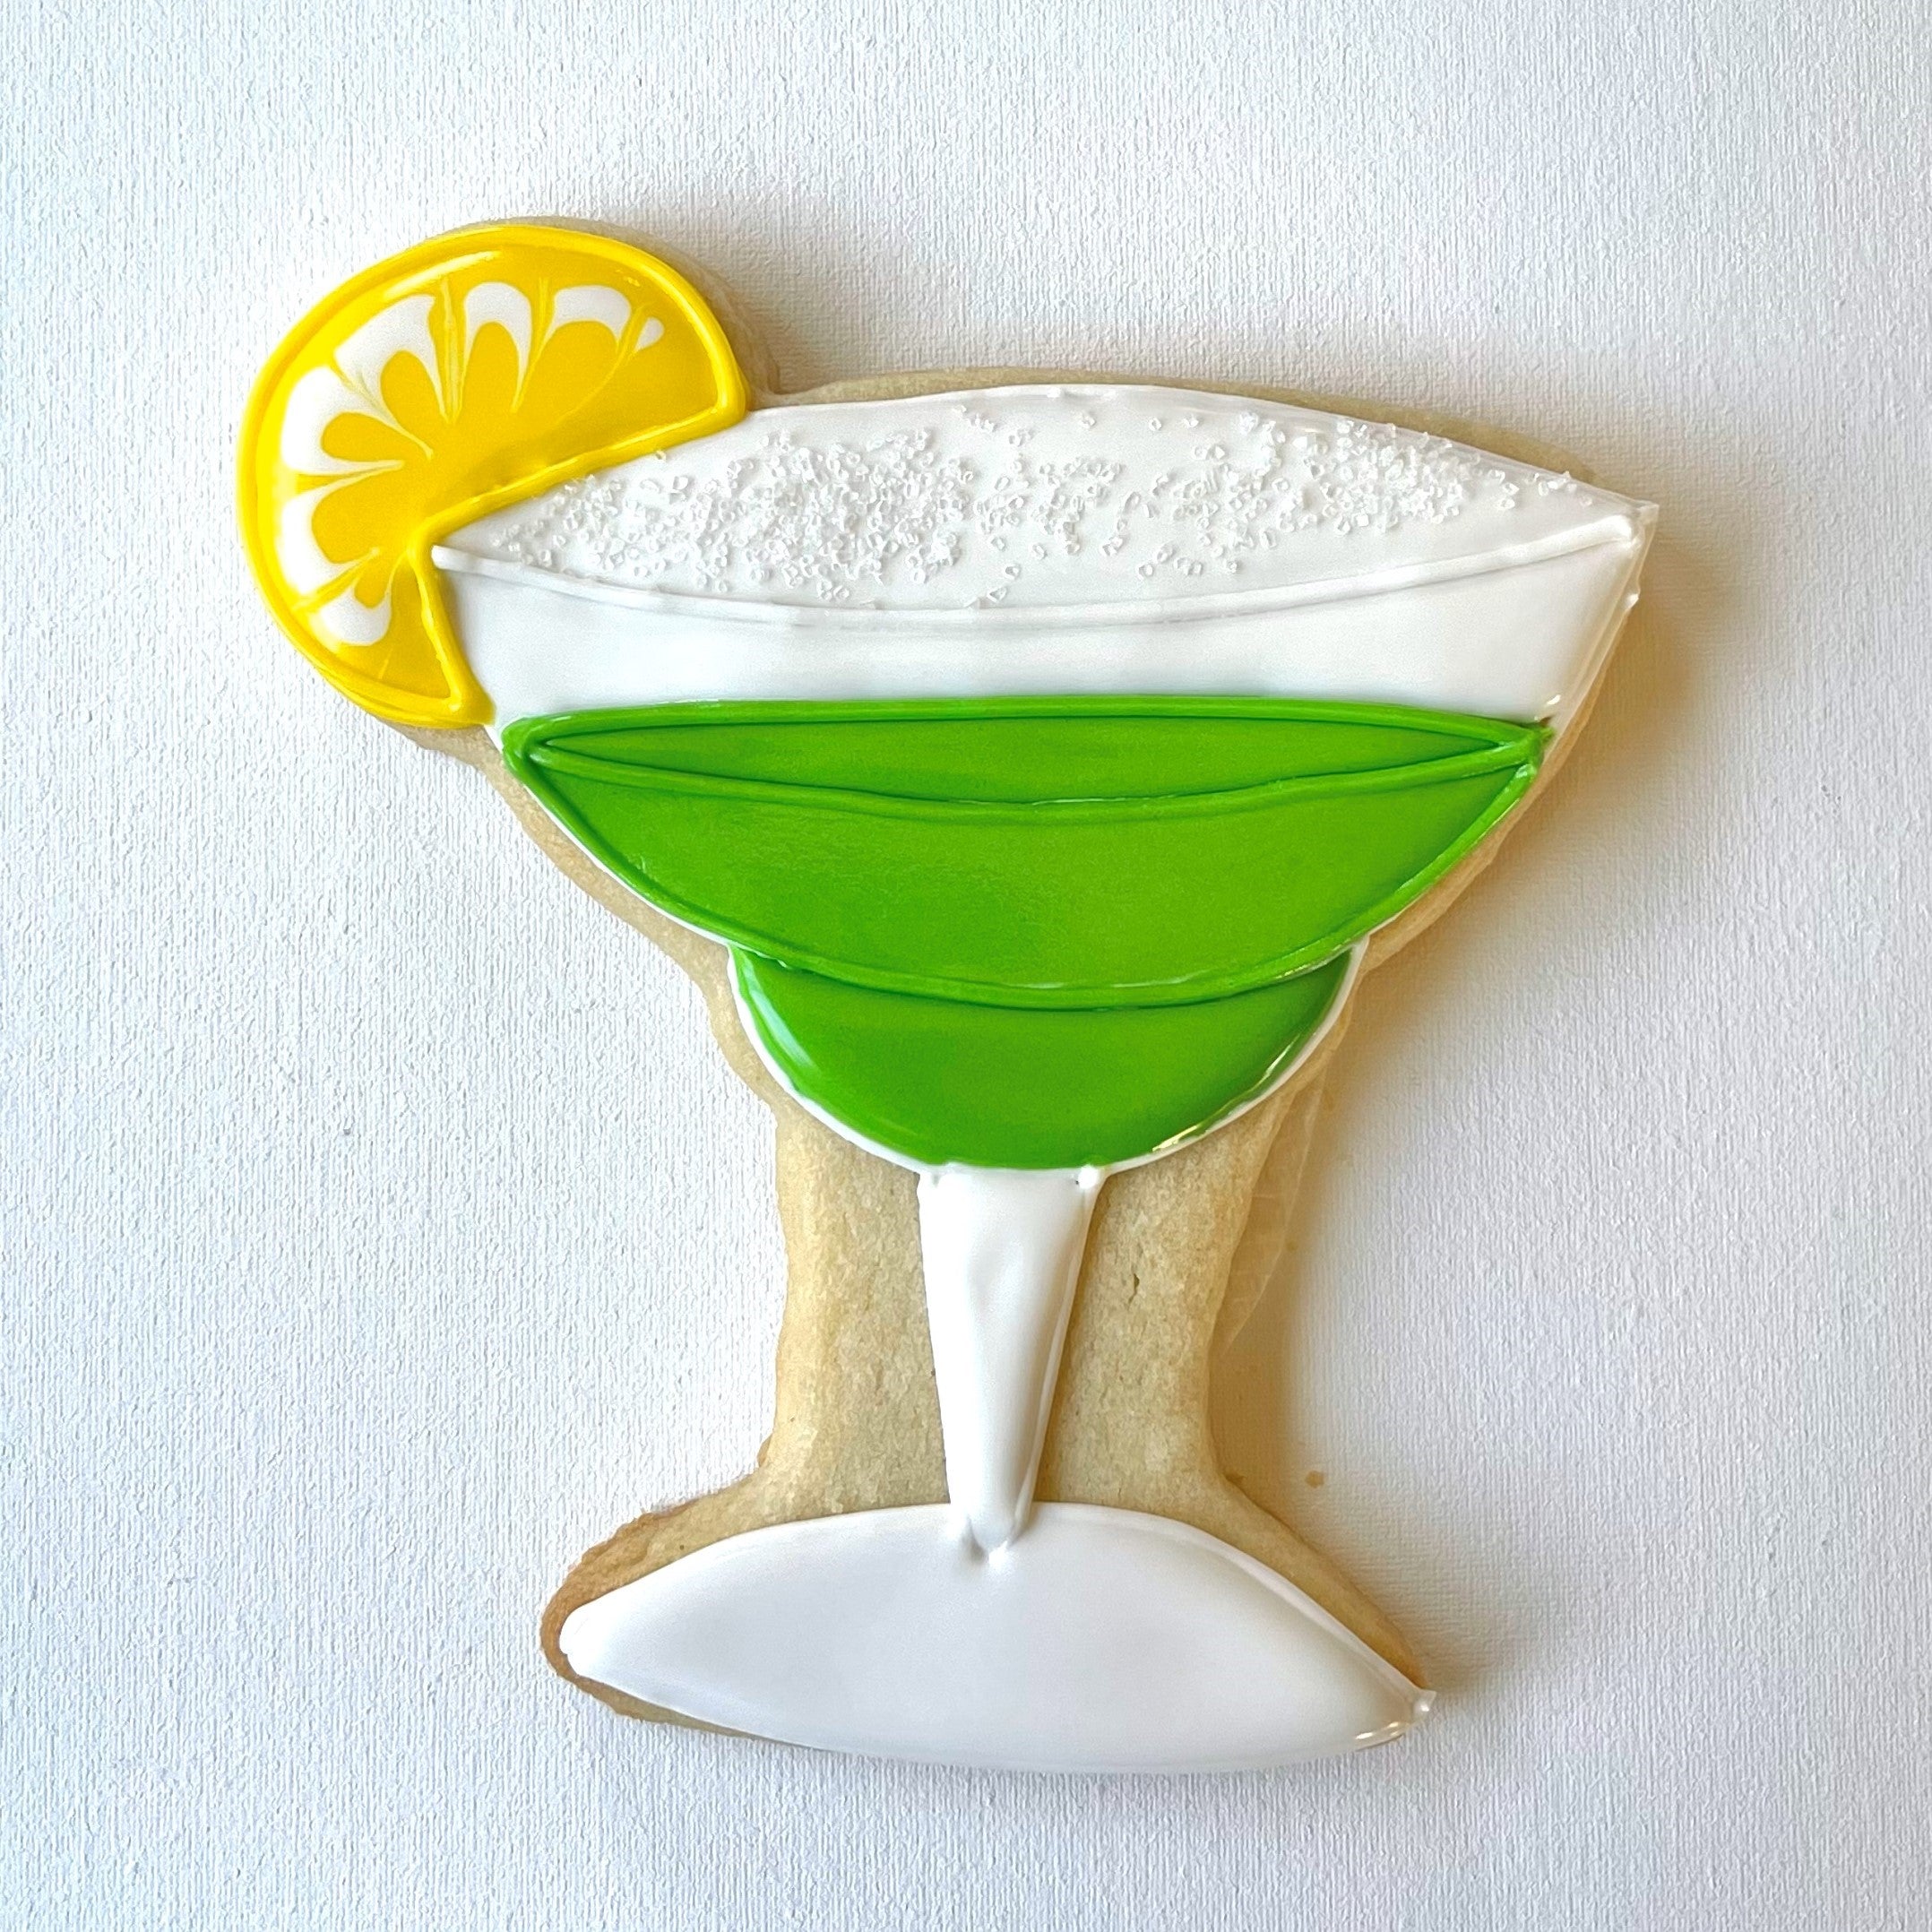 How to Decorate a Margarita Sugar Cookie